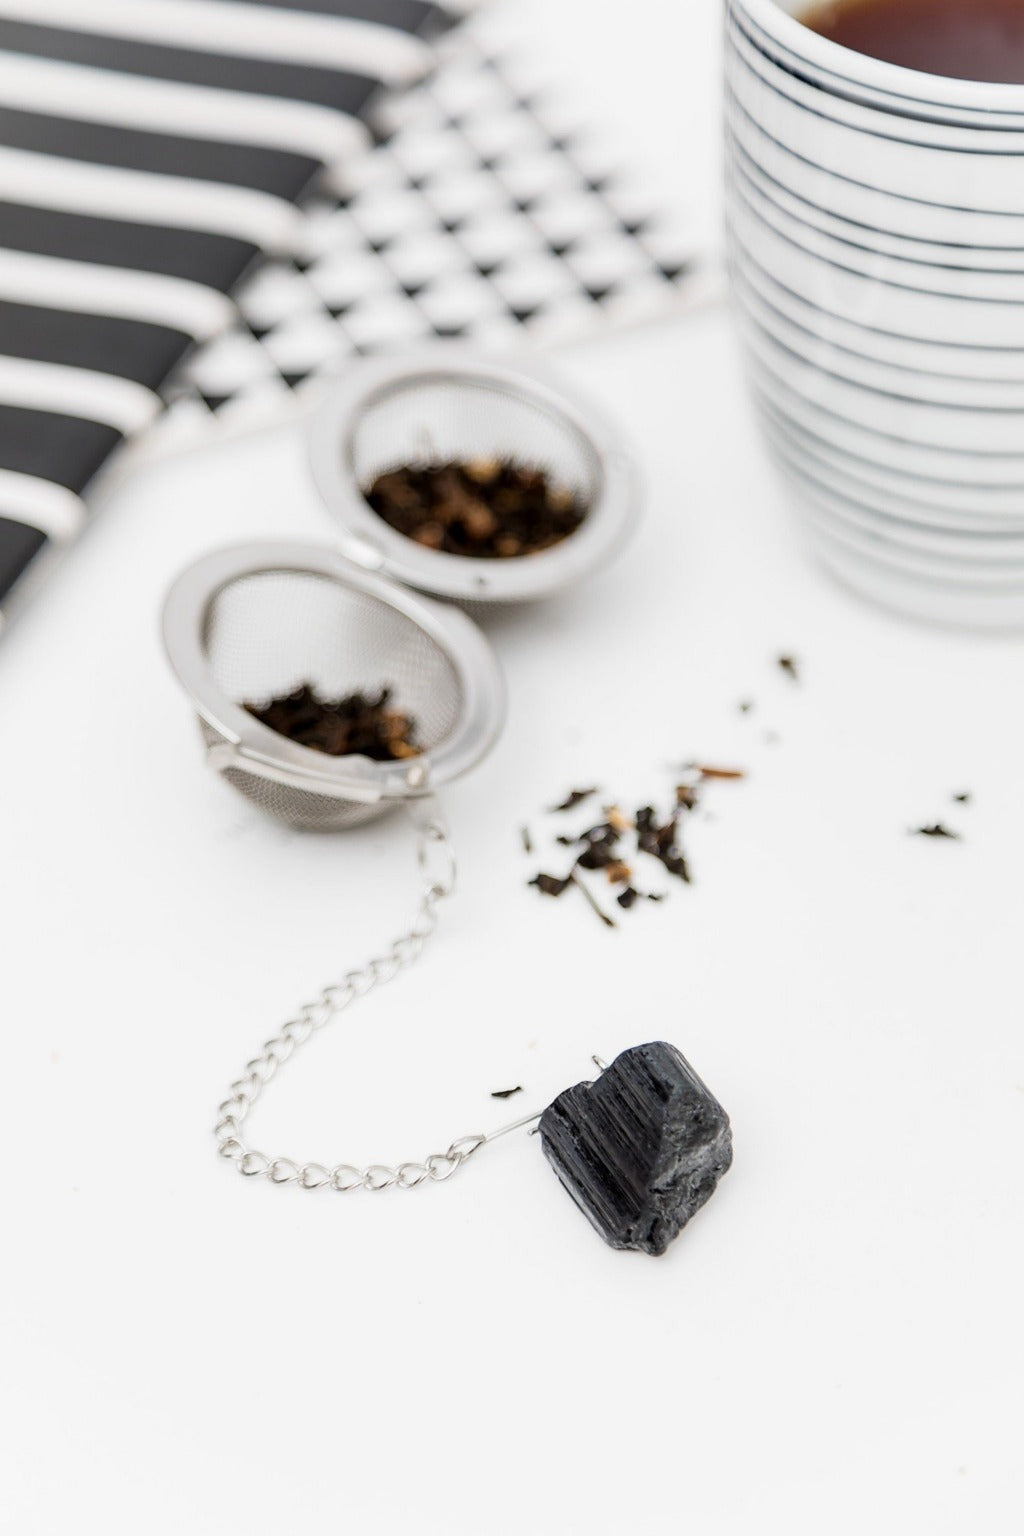 stainless tea strainer with black tourmaline for black tea 